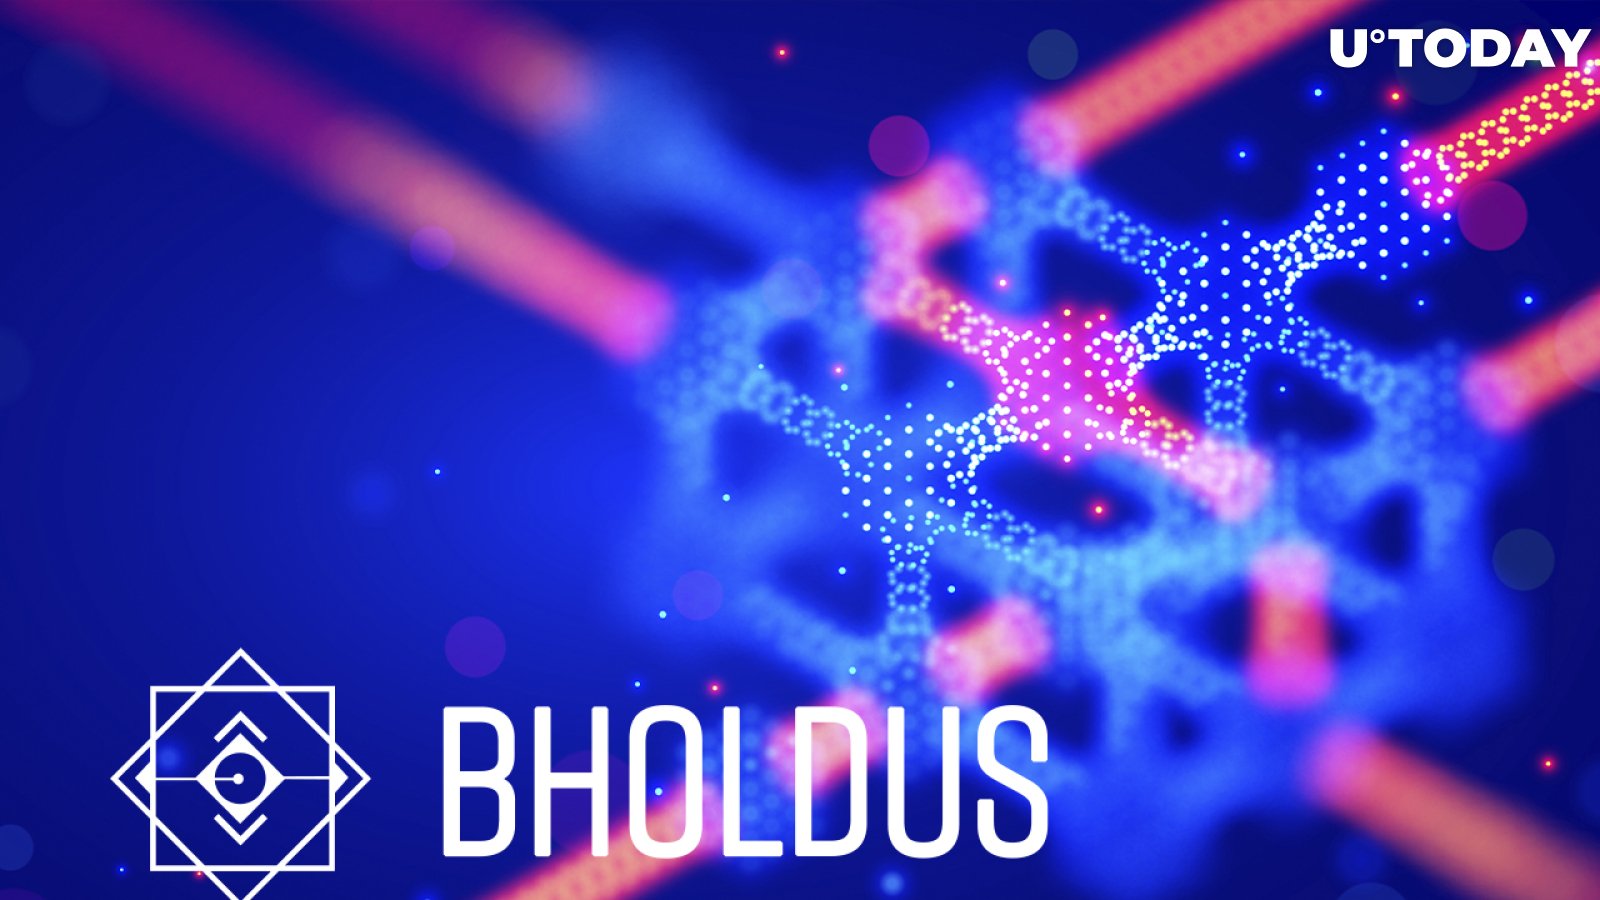 Bholdus Blockchain Finally Goes Live in Mainnet, Shares Web3 and Metaverse Ambitions